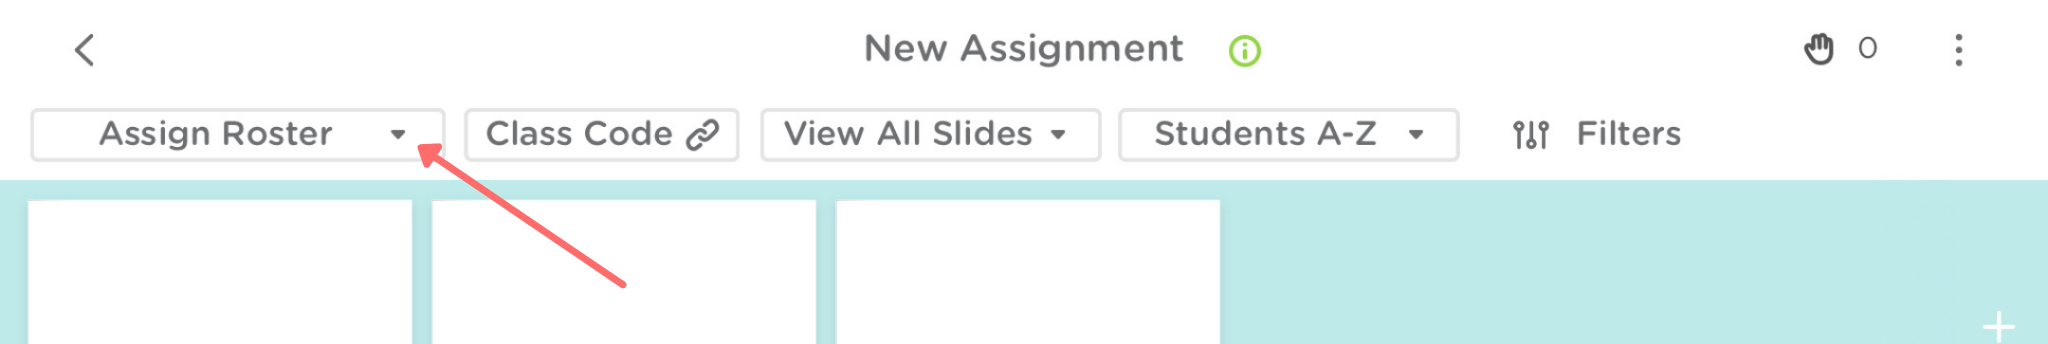 The assignment view on Classkick app. A red arrow points to Assign a roster drop down menu on the left hand side.